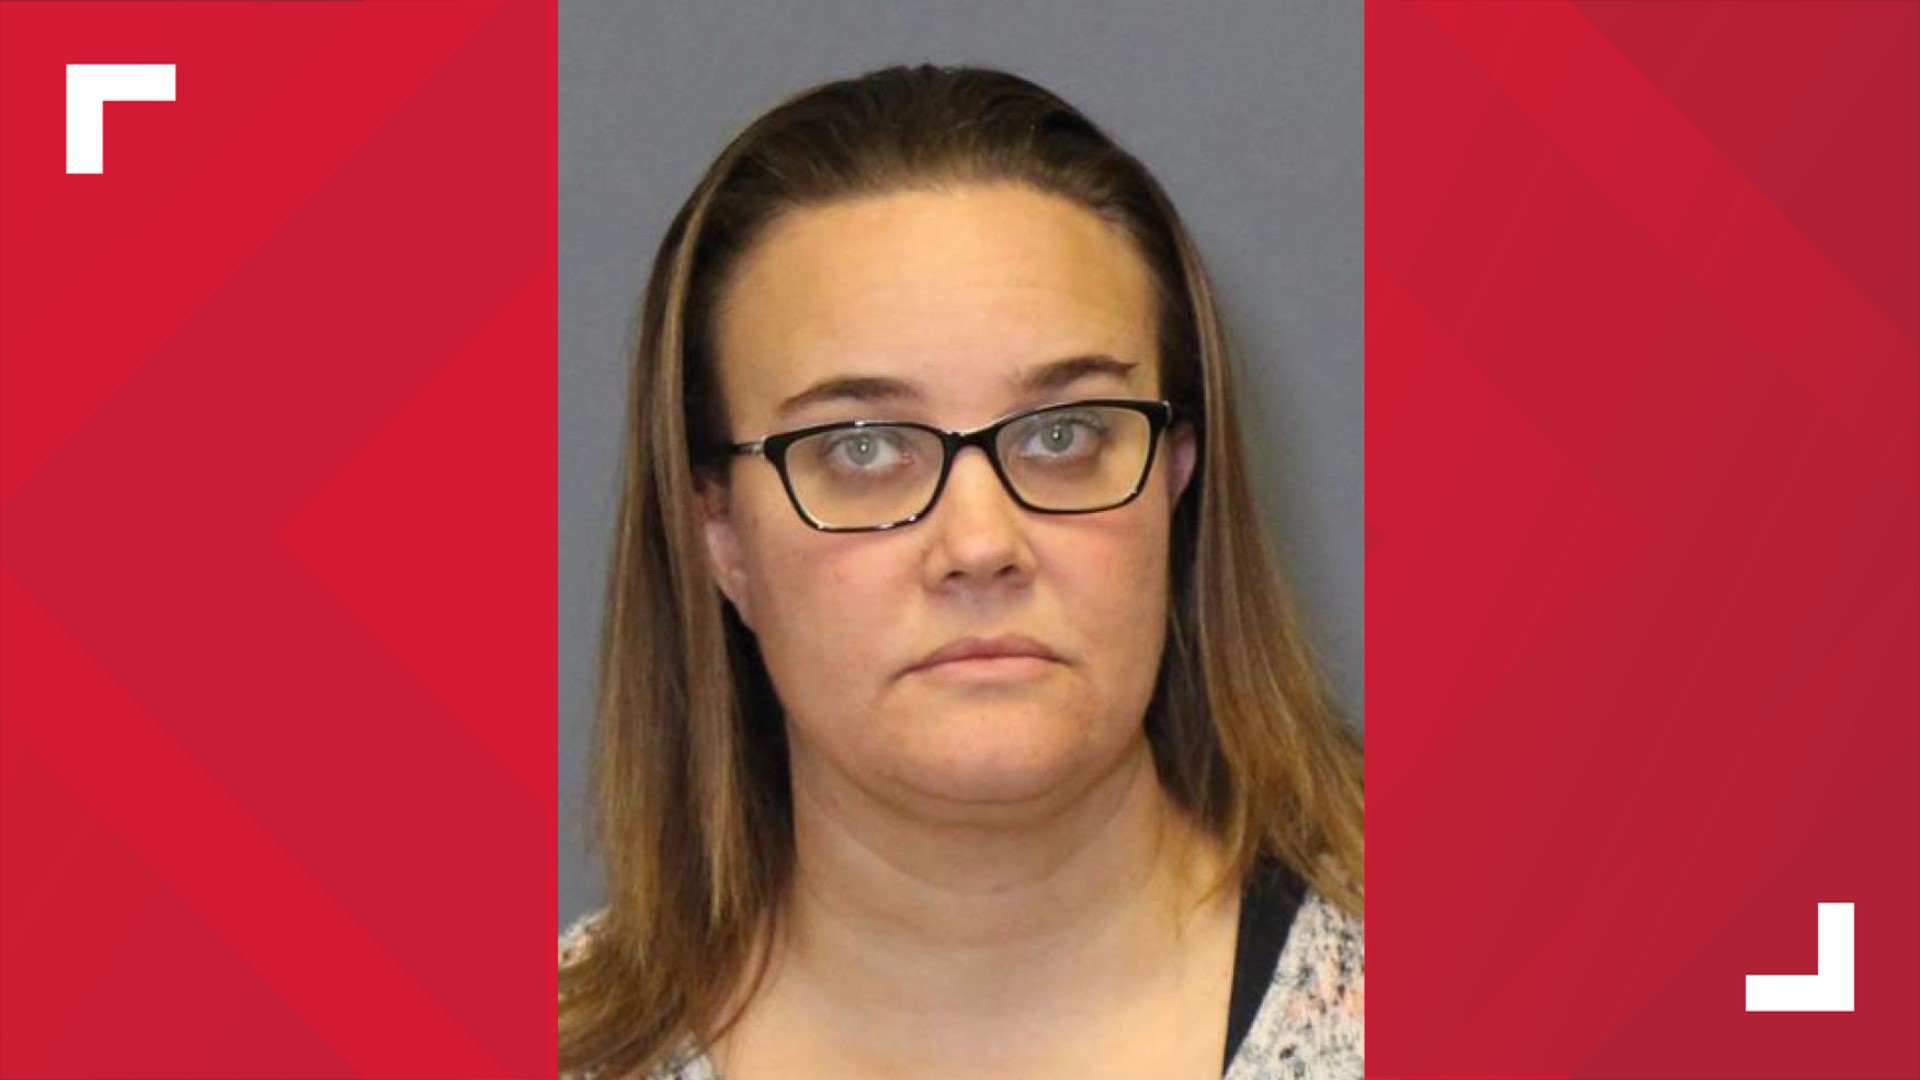 Guilford County deputies say Carly Smith is accused of having an 'inappropriate relationship' with a student. She's charged with statutory rape.